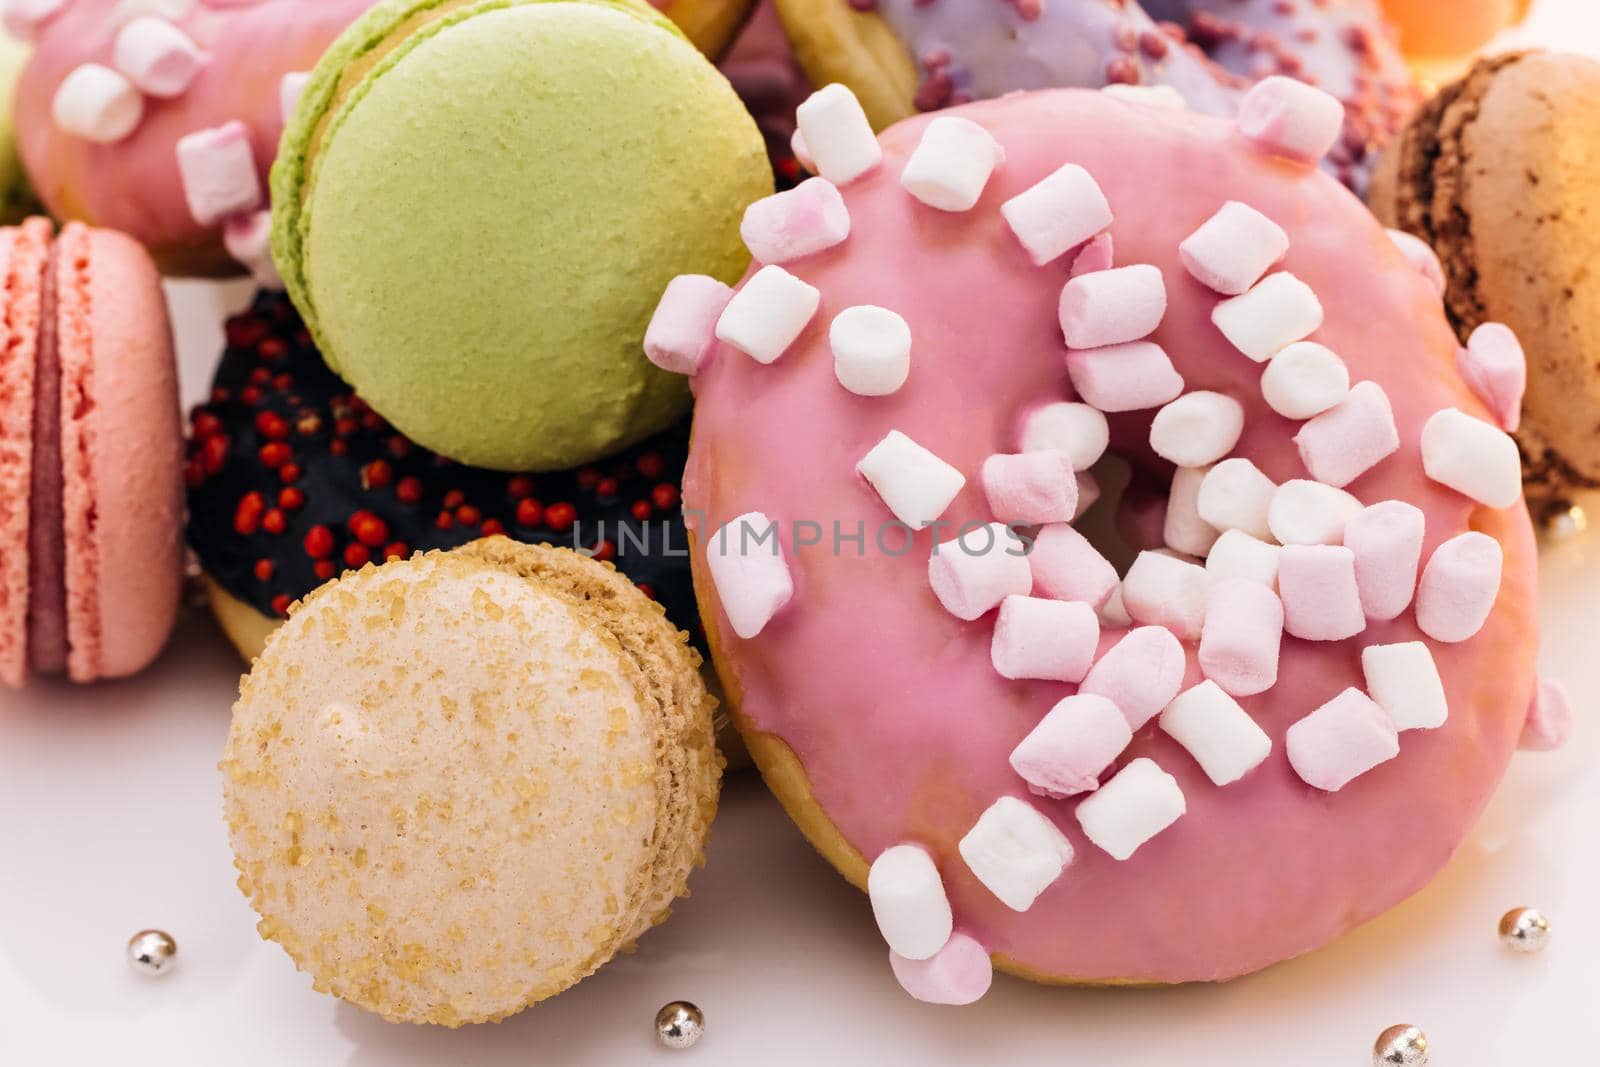 Many multi-colored macarons donuts with different tastes, dessert. French macaroon. Macaroons and donuts on a white background by uflypro